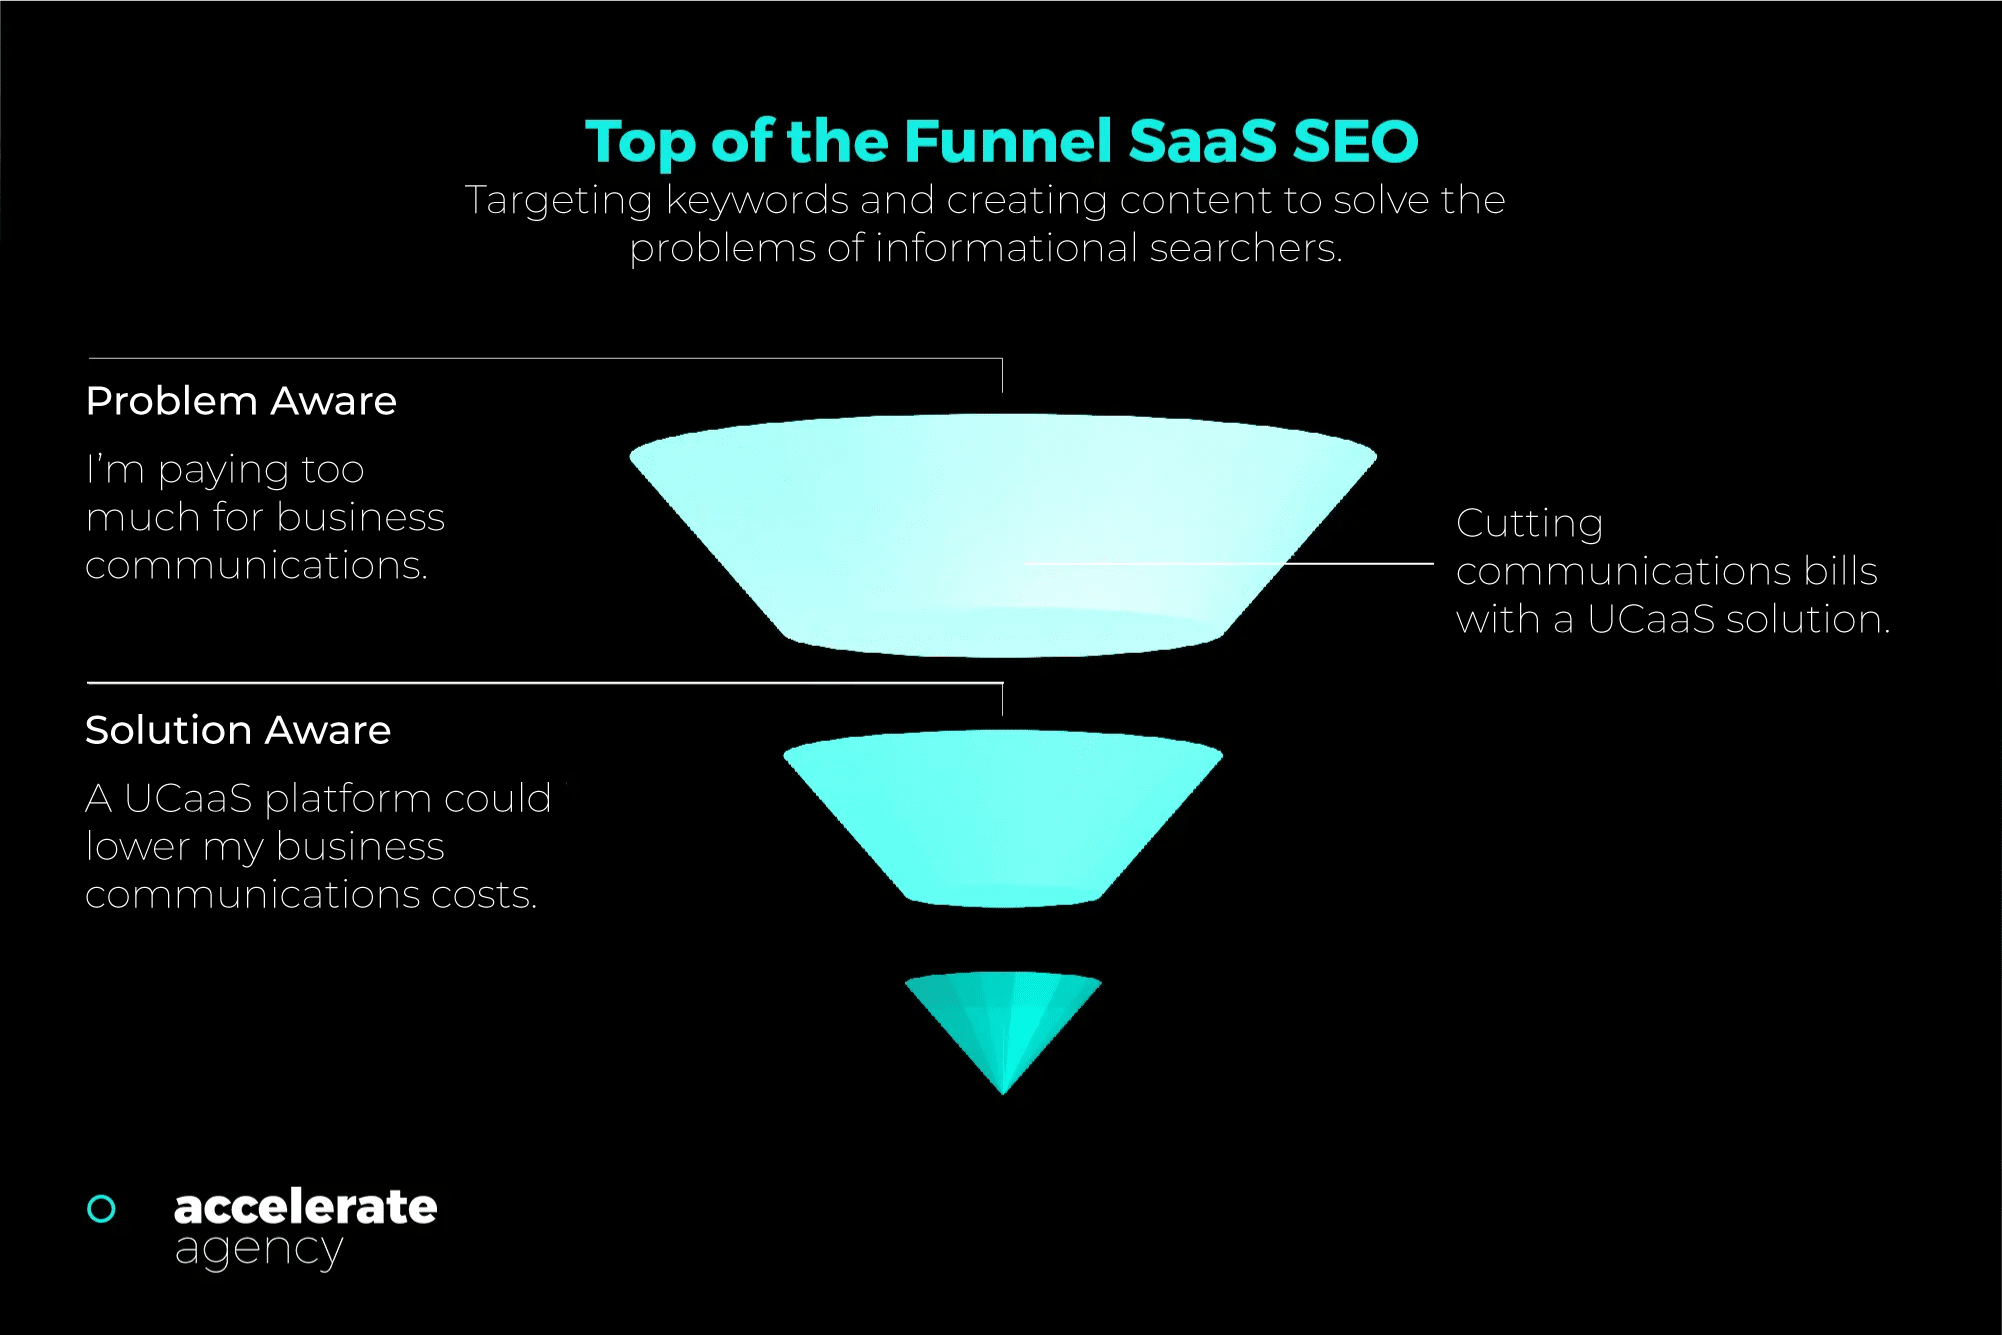 Top of the Funnel SaaS SEO: Targeting keywords and creating content to solve the problems of informational searchers.